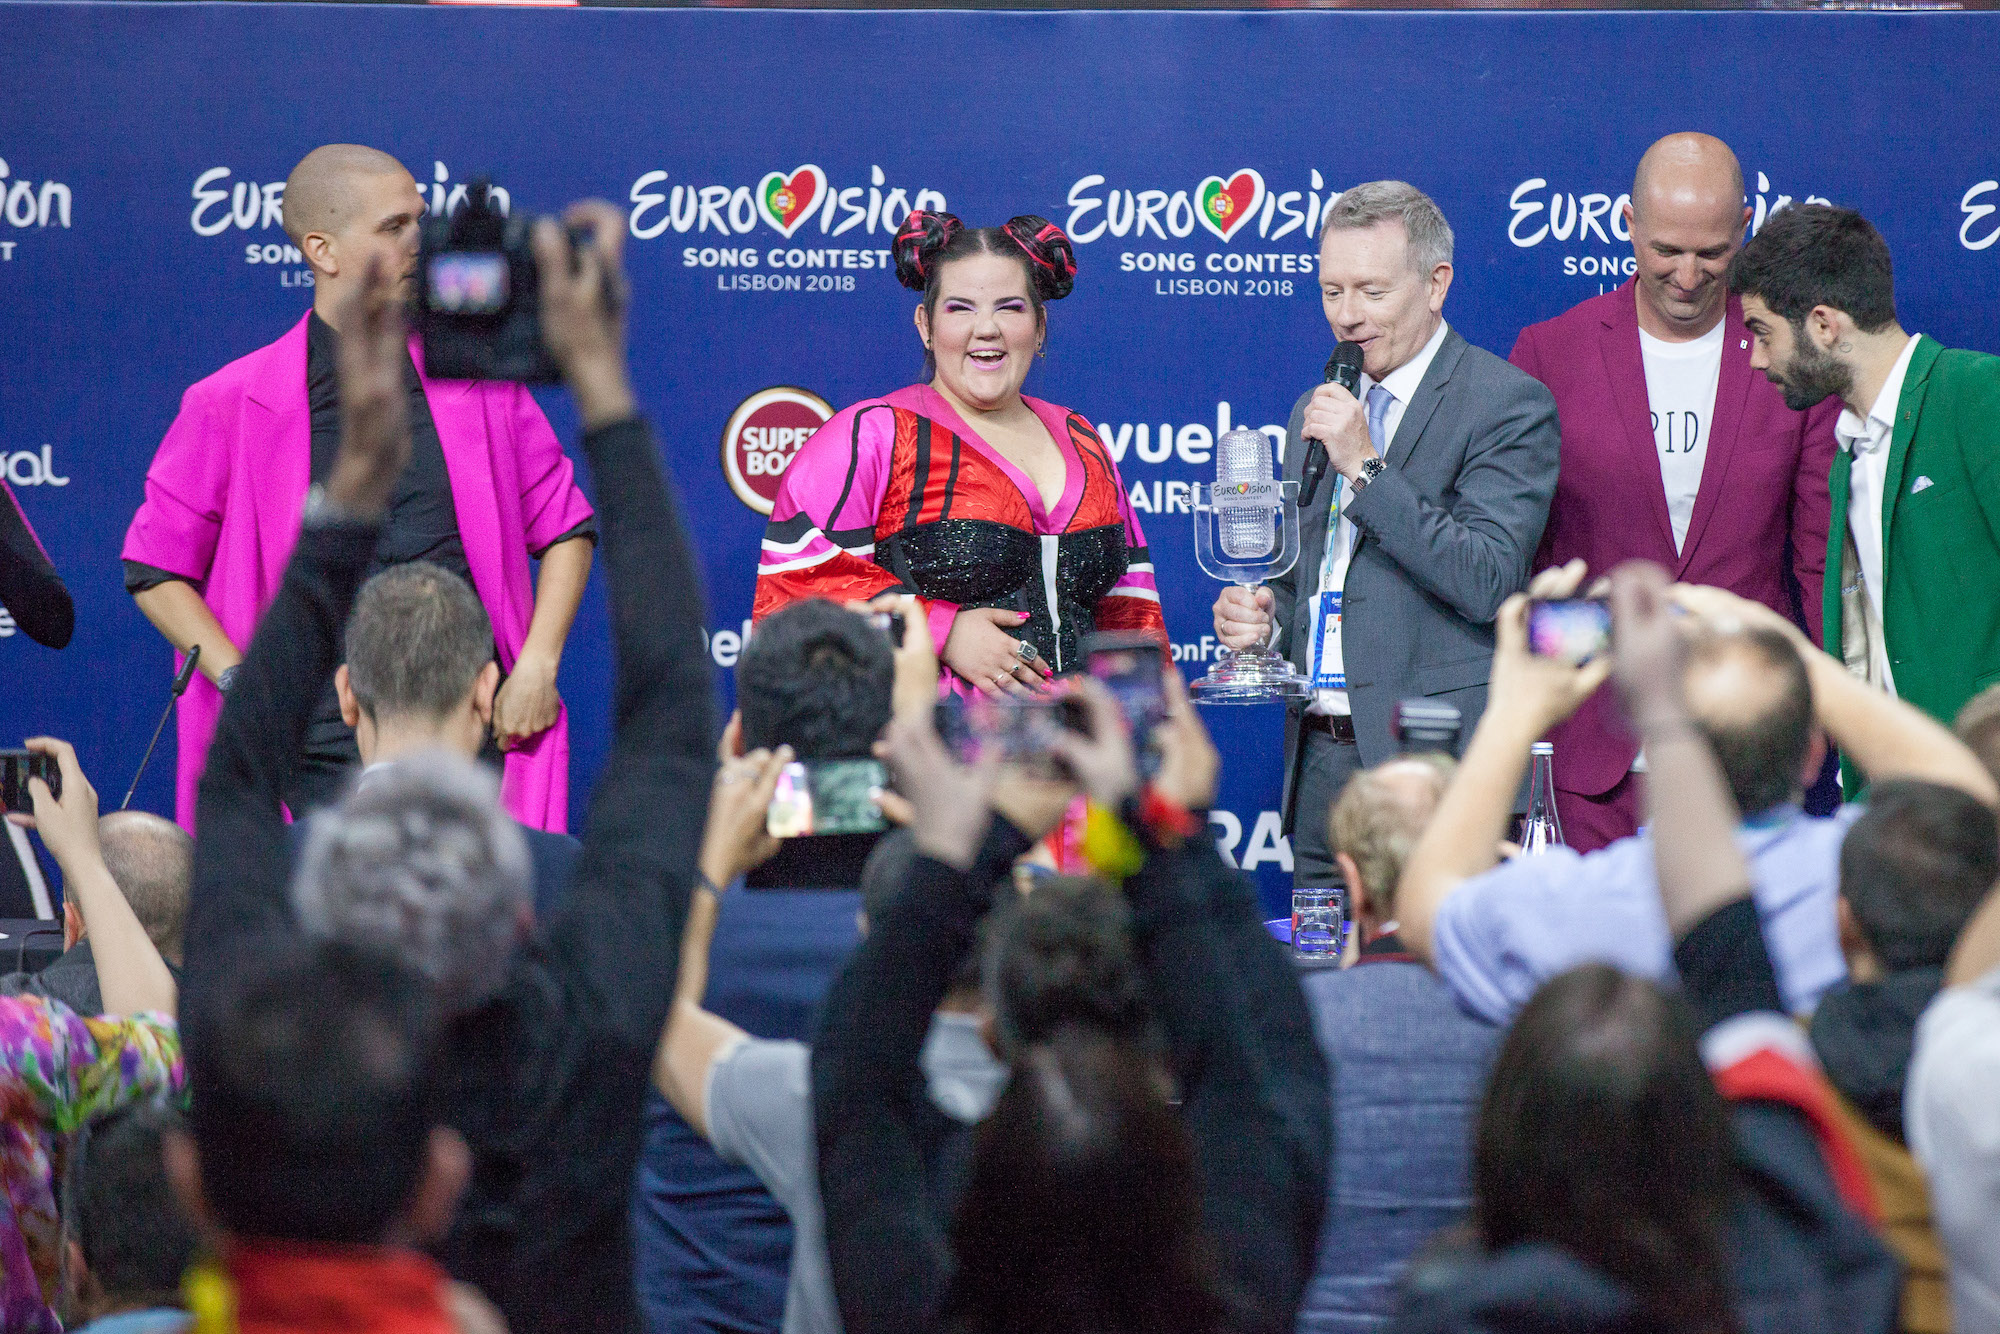 Netta at the 2018 Eurovision Song Contest